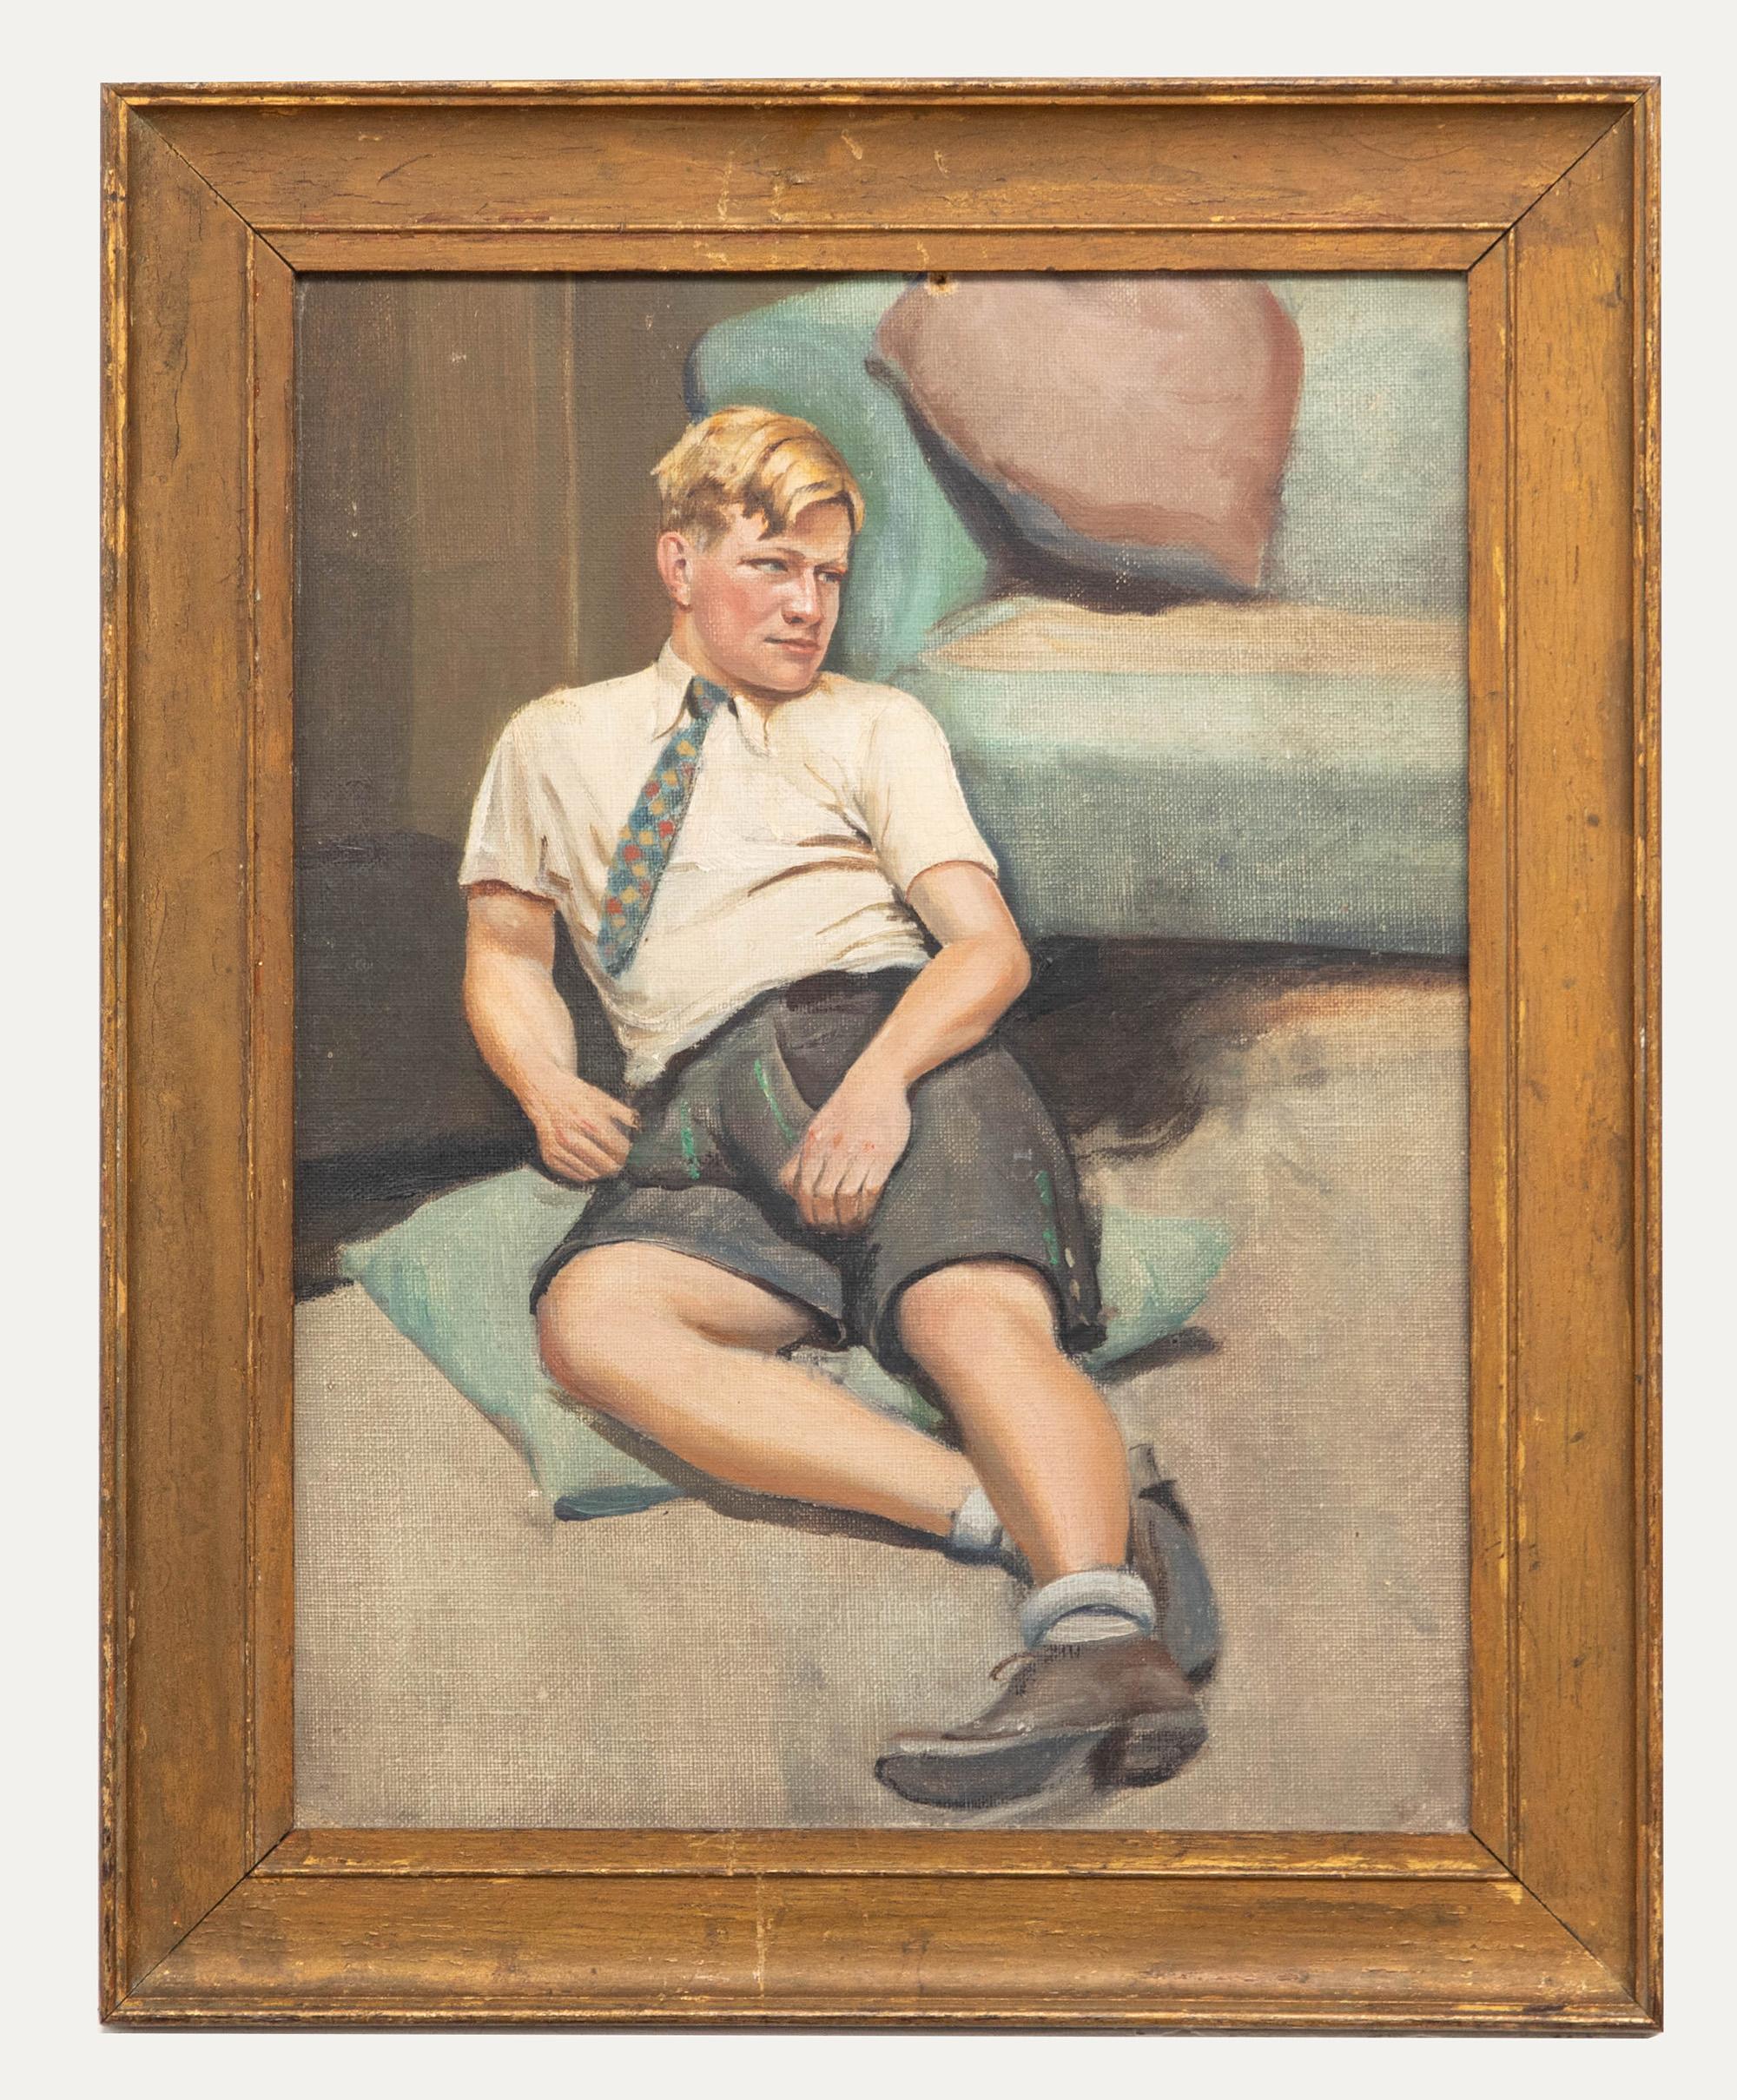 Unknown Portrait Painting - Mid 20th Century Oil - After School